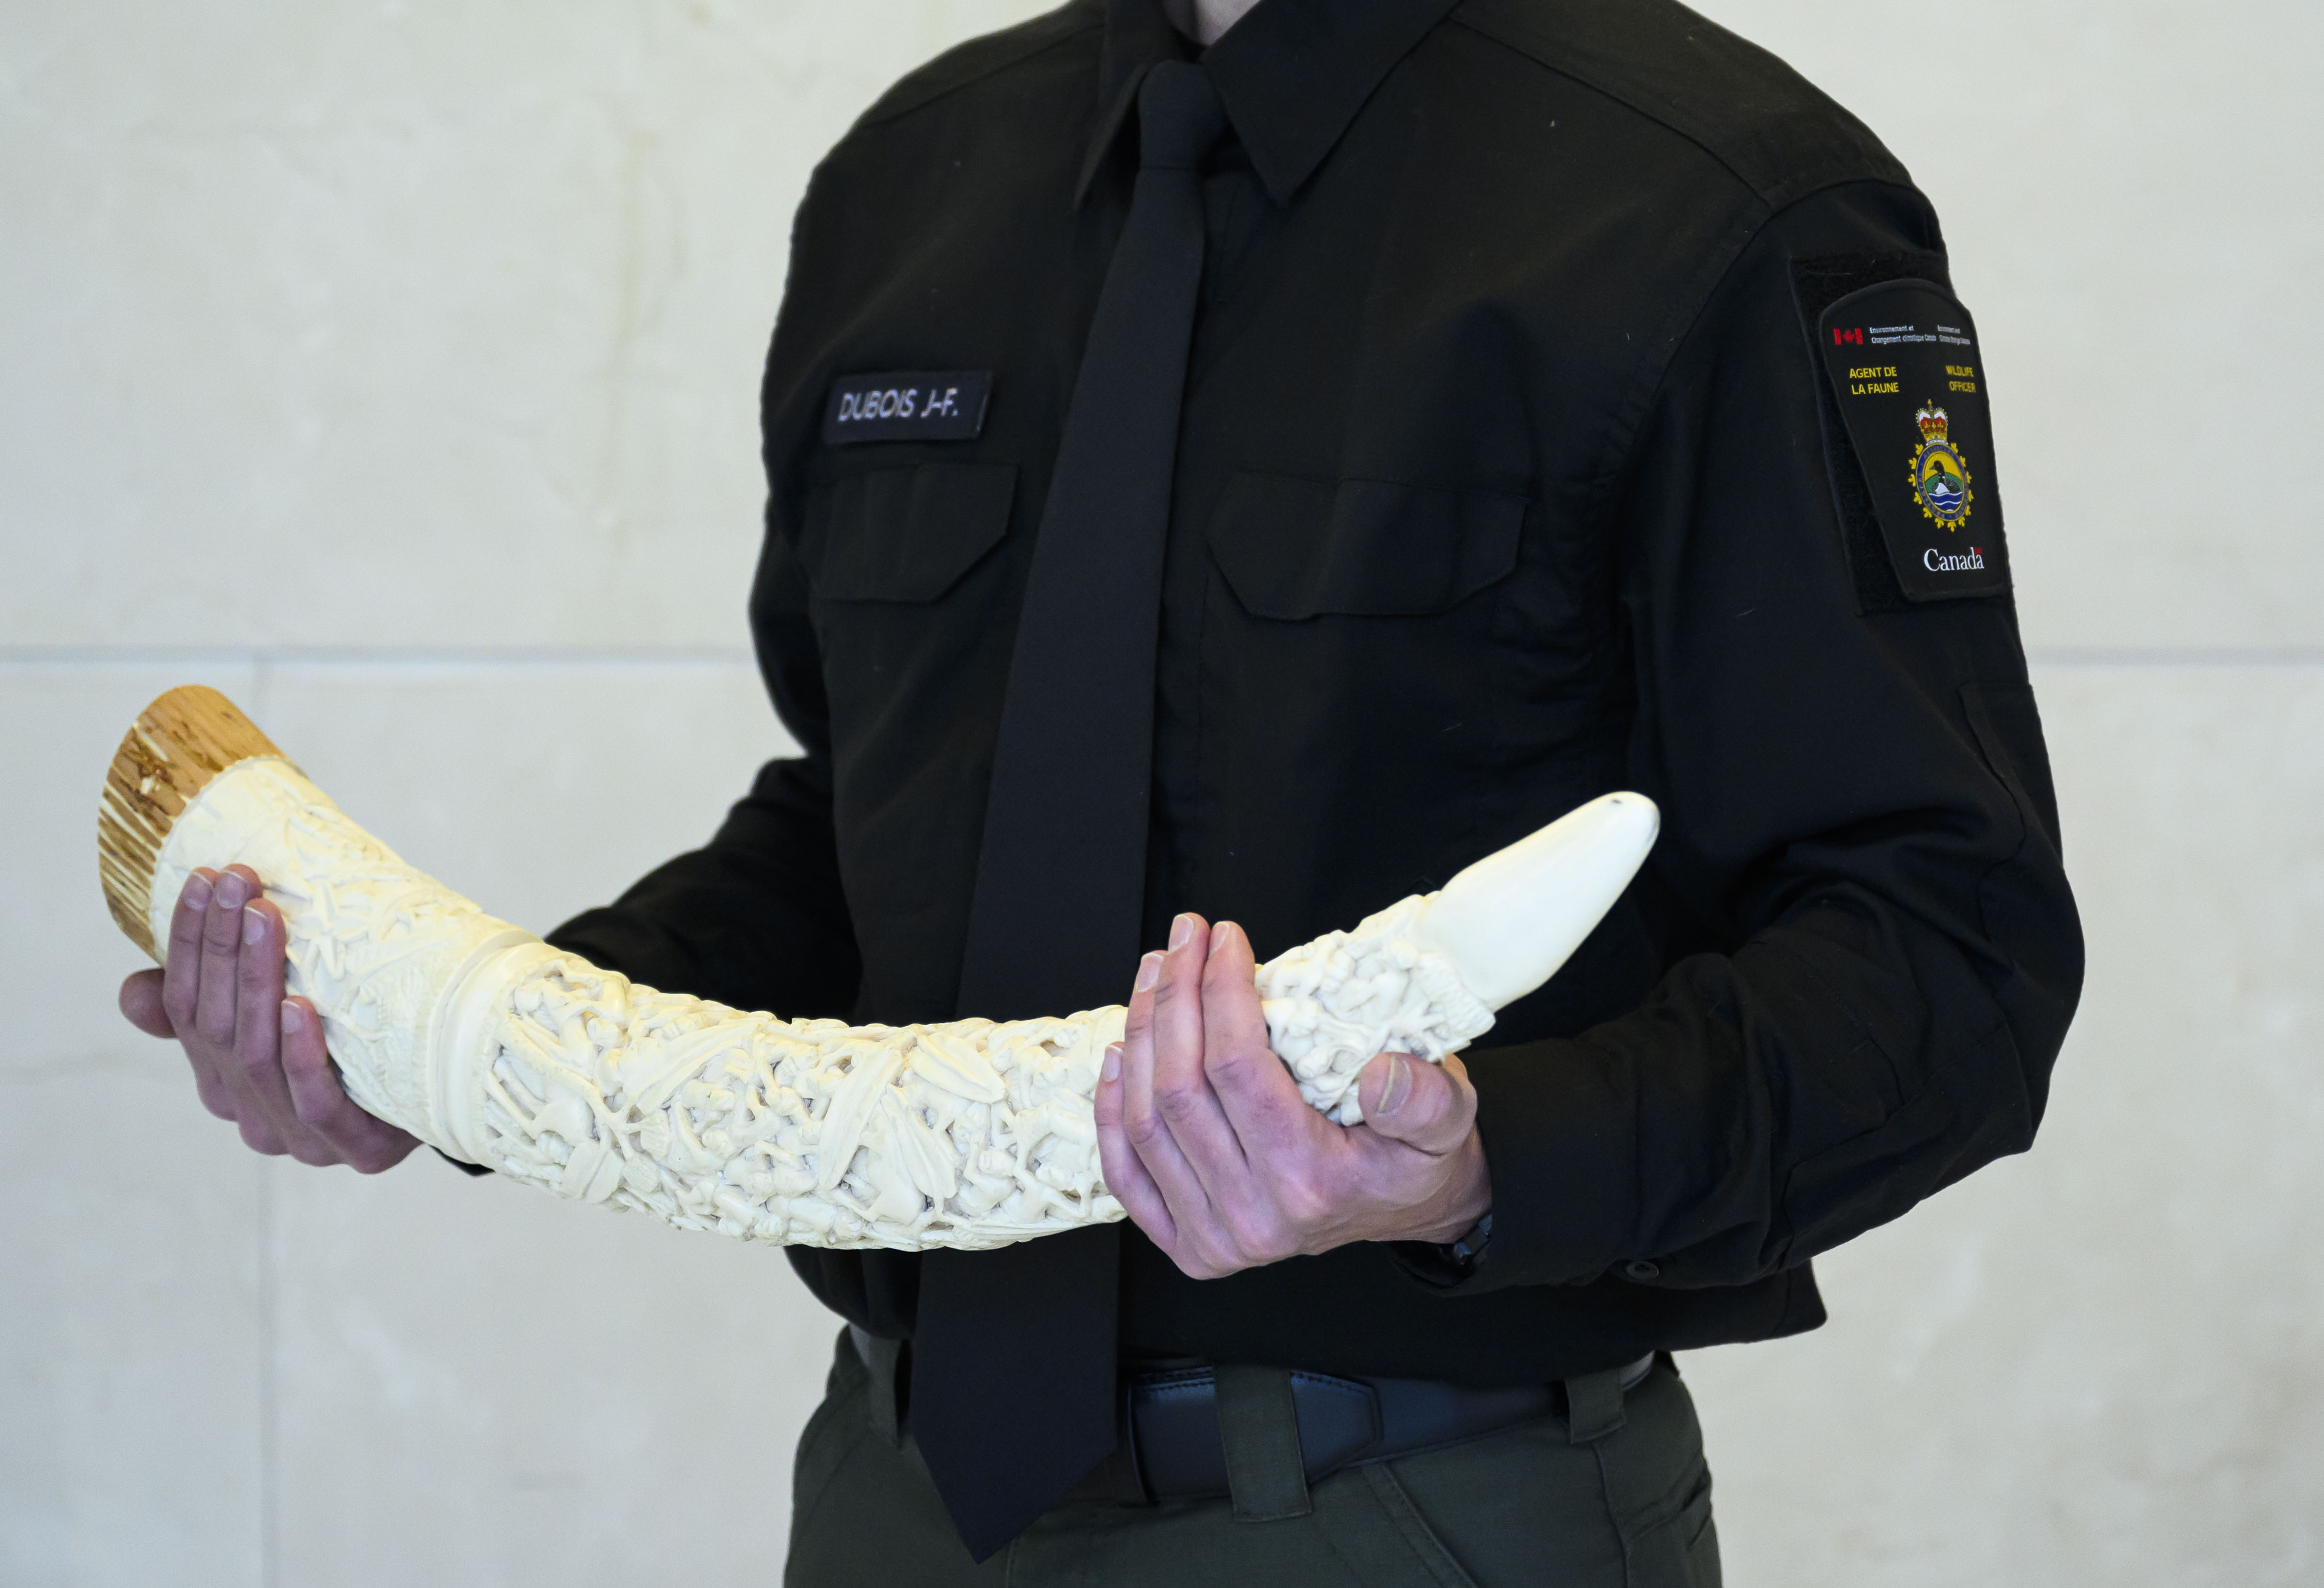 Canada is restricting the trade of elephant ivory, rhino horns